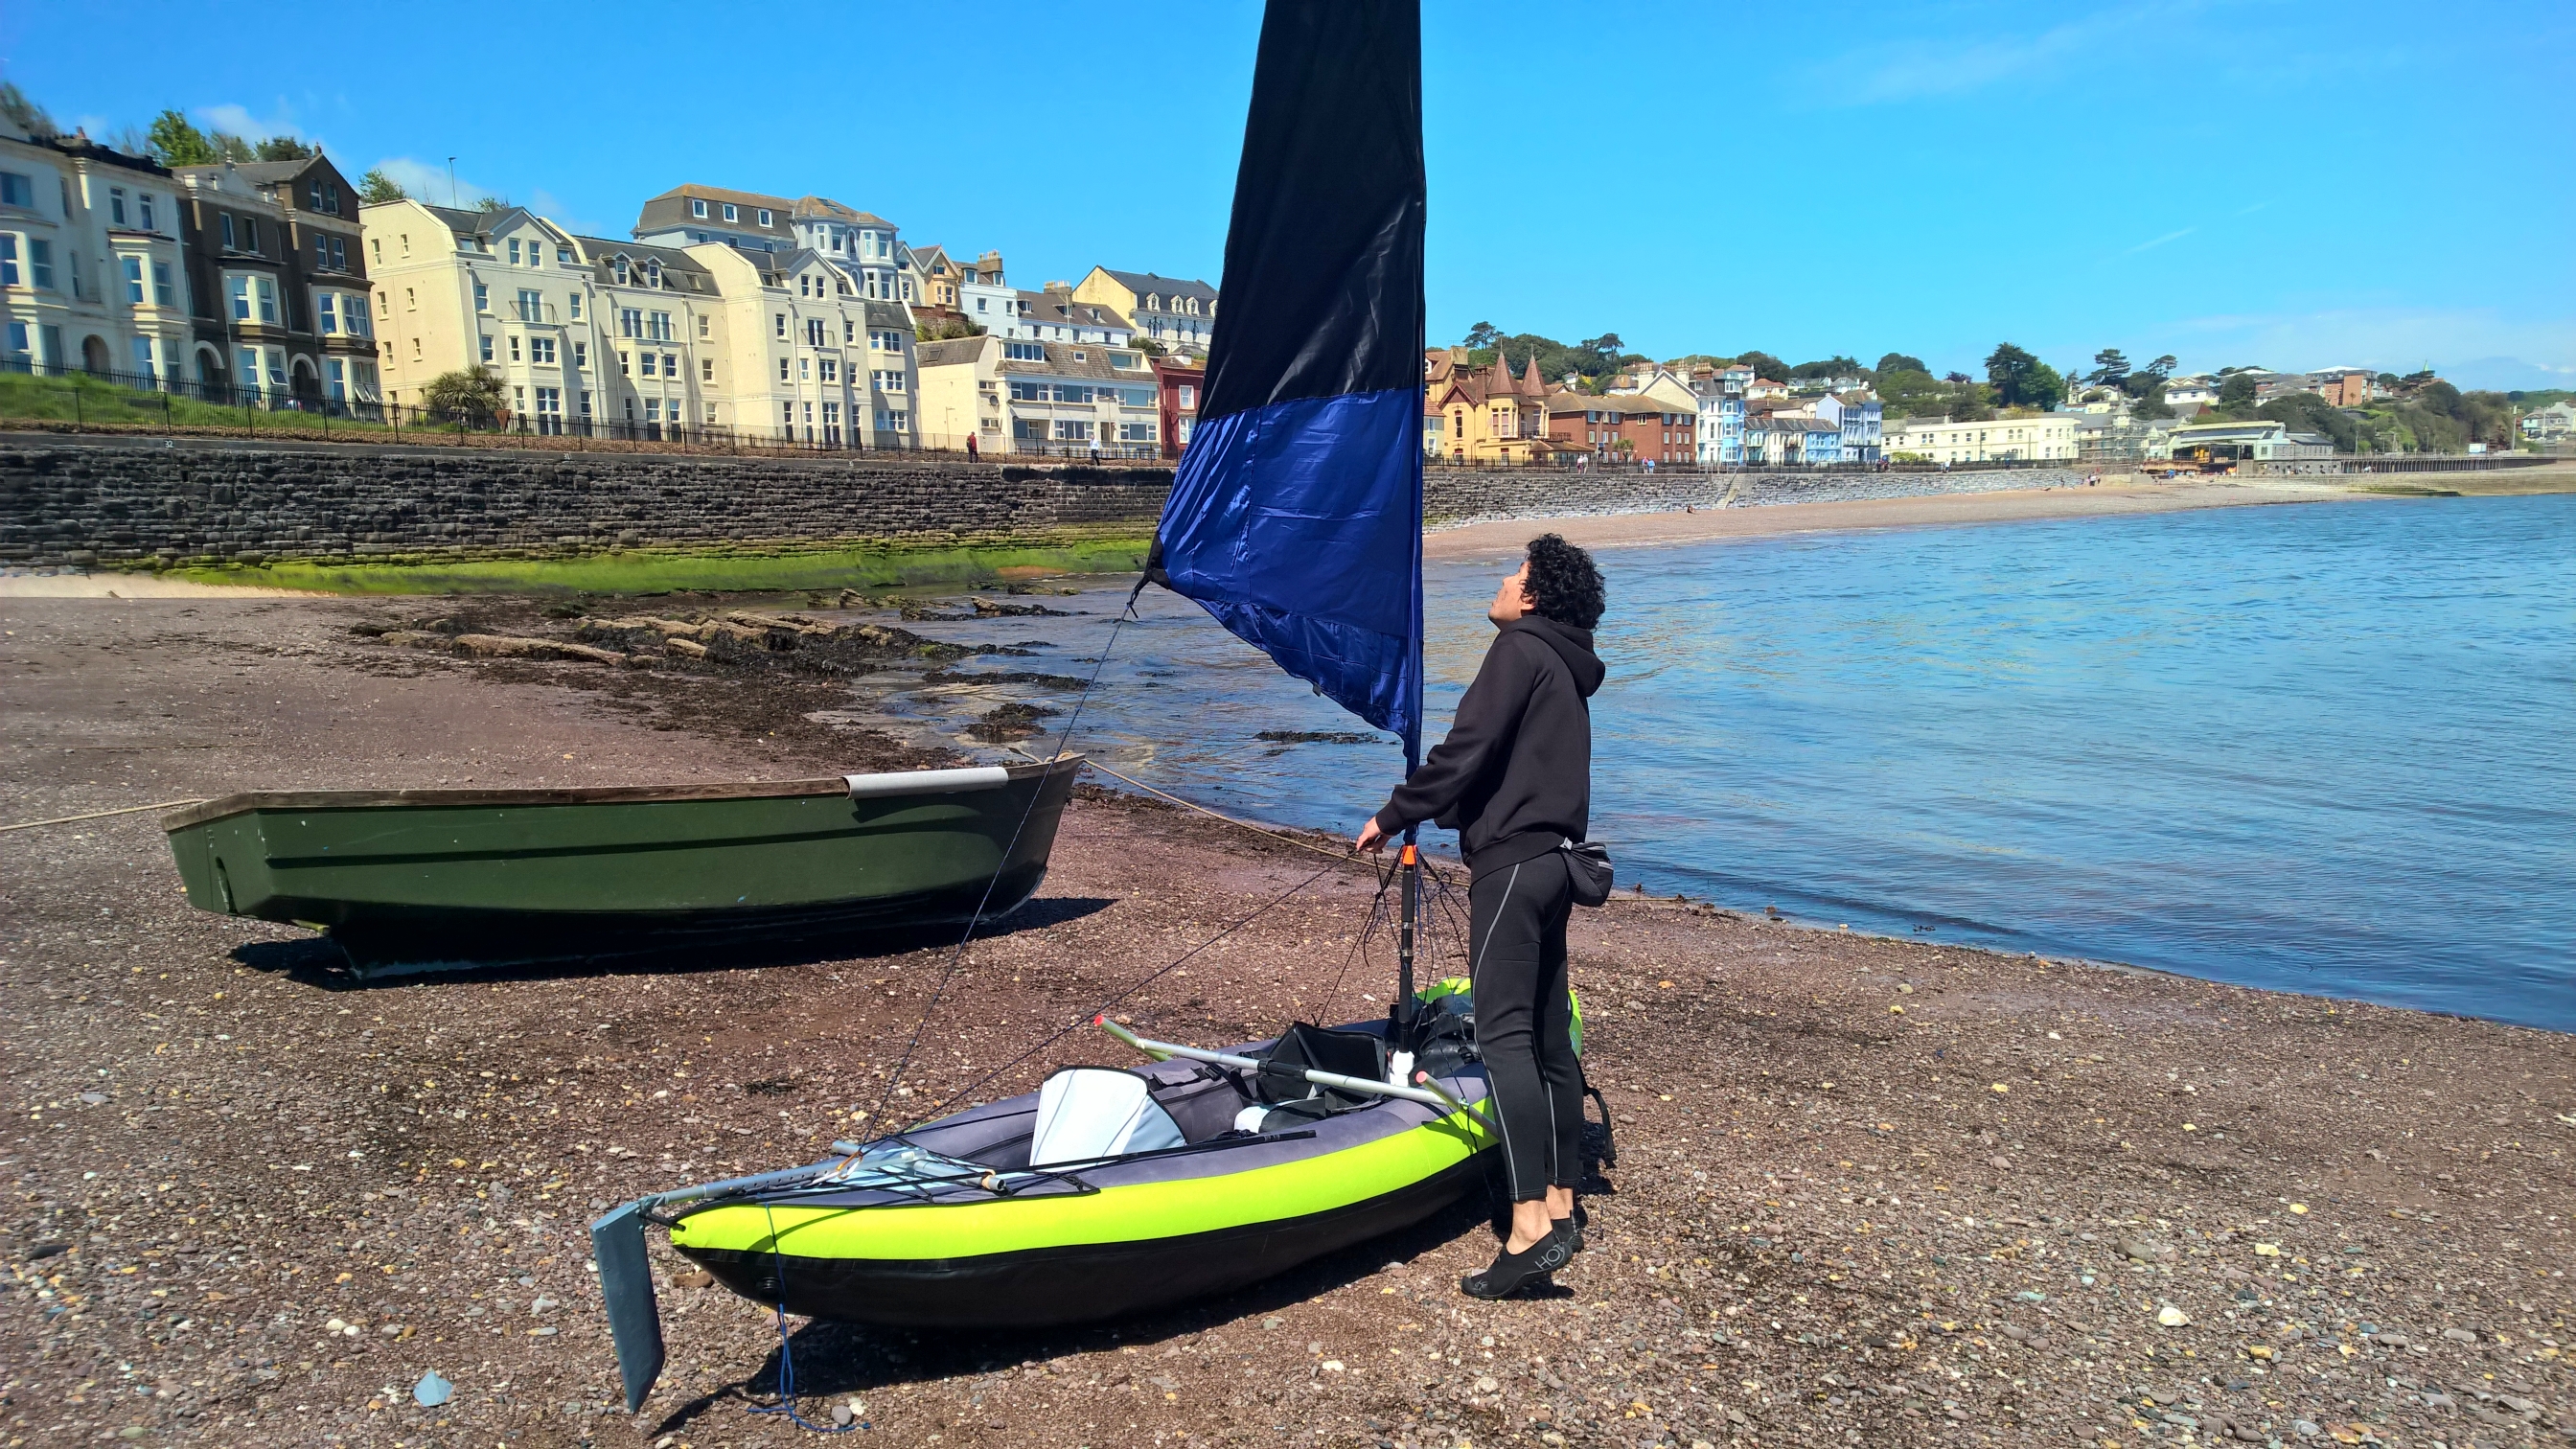 man building a sailing kit in a kayak in the beach